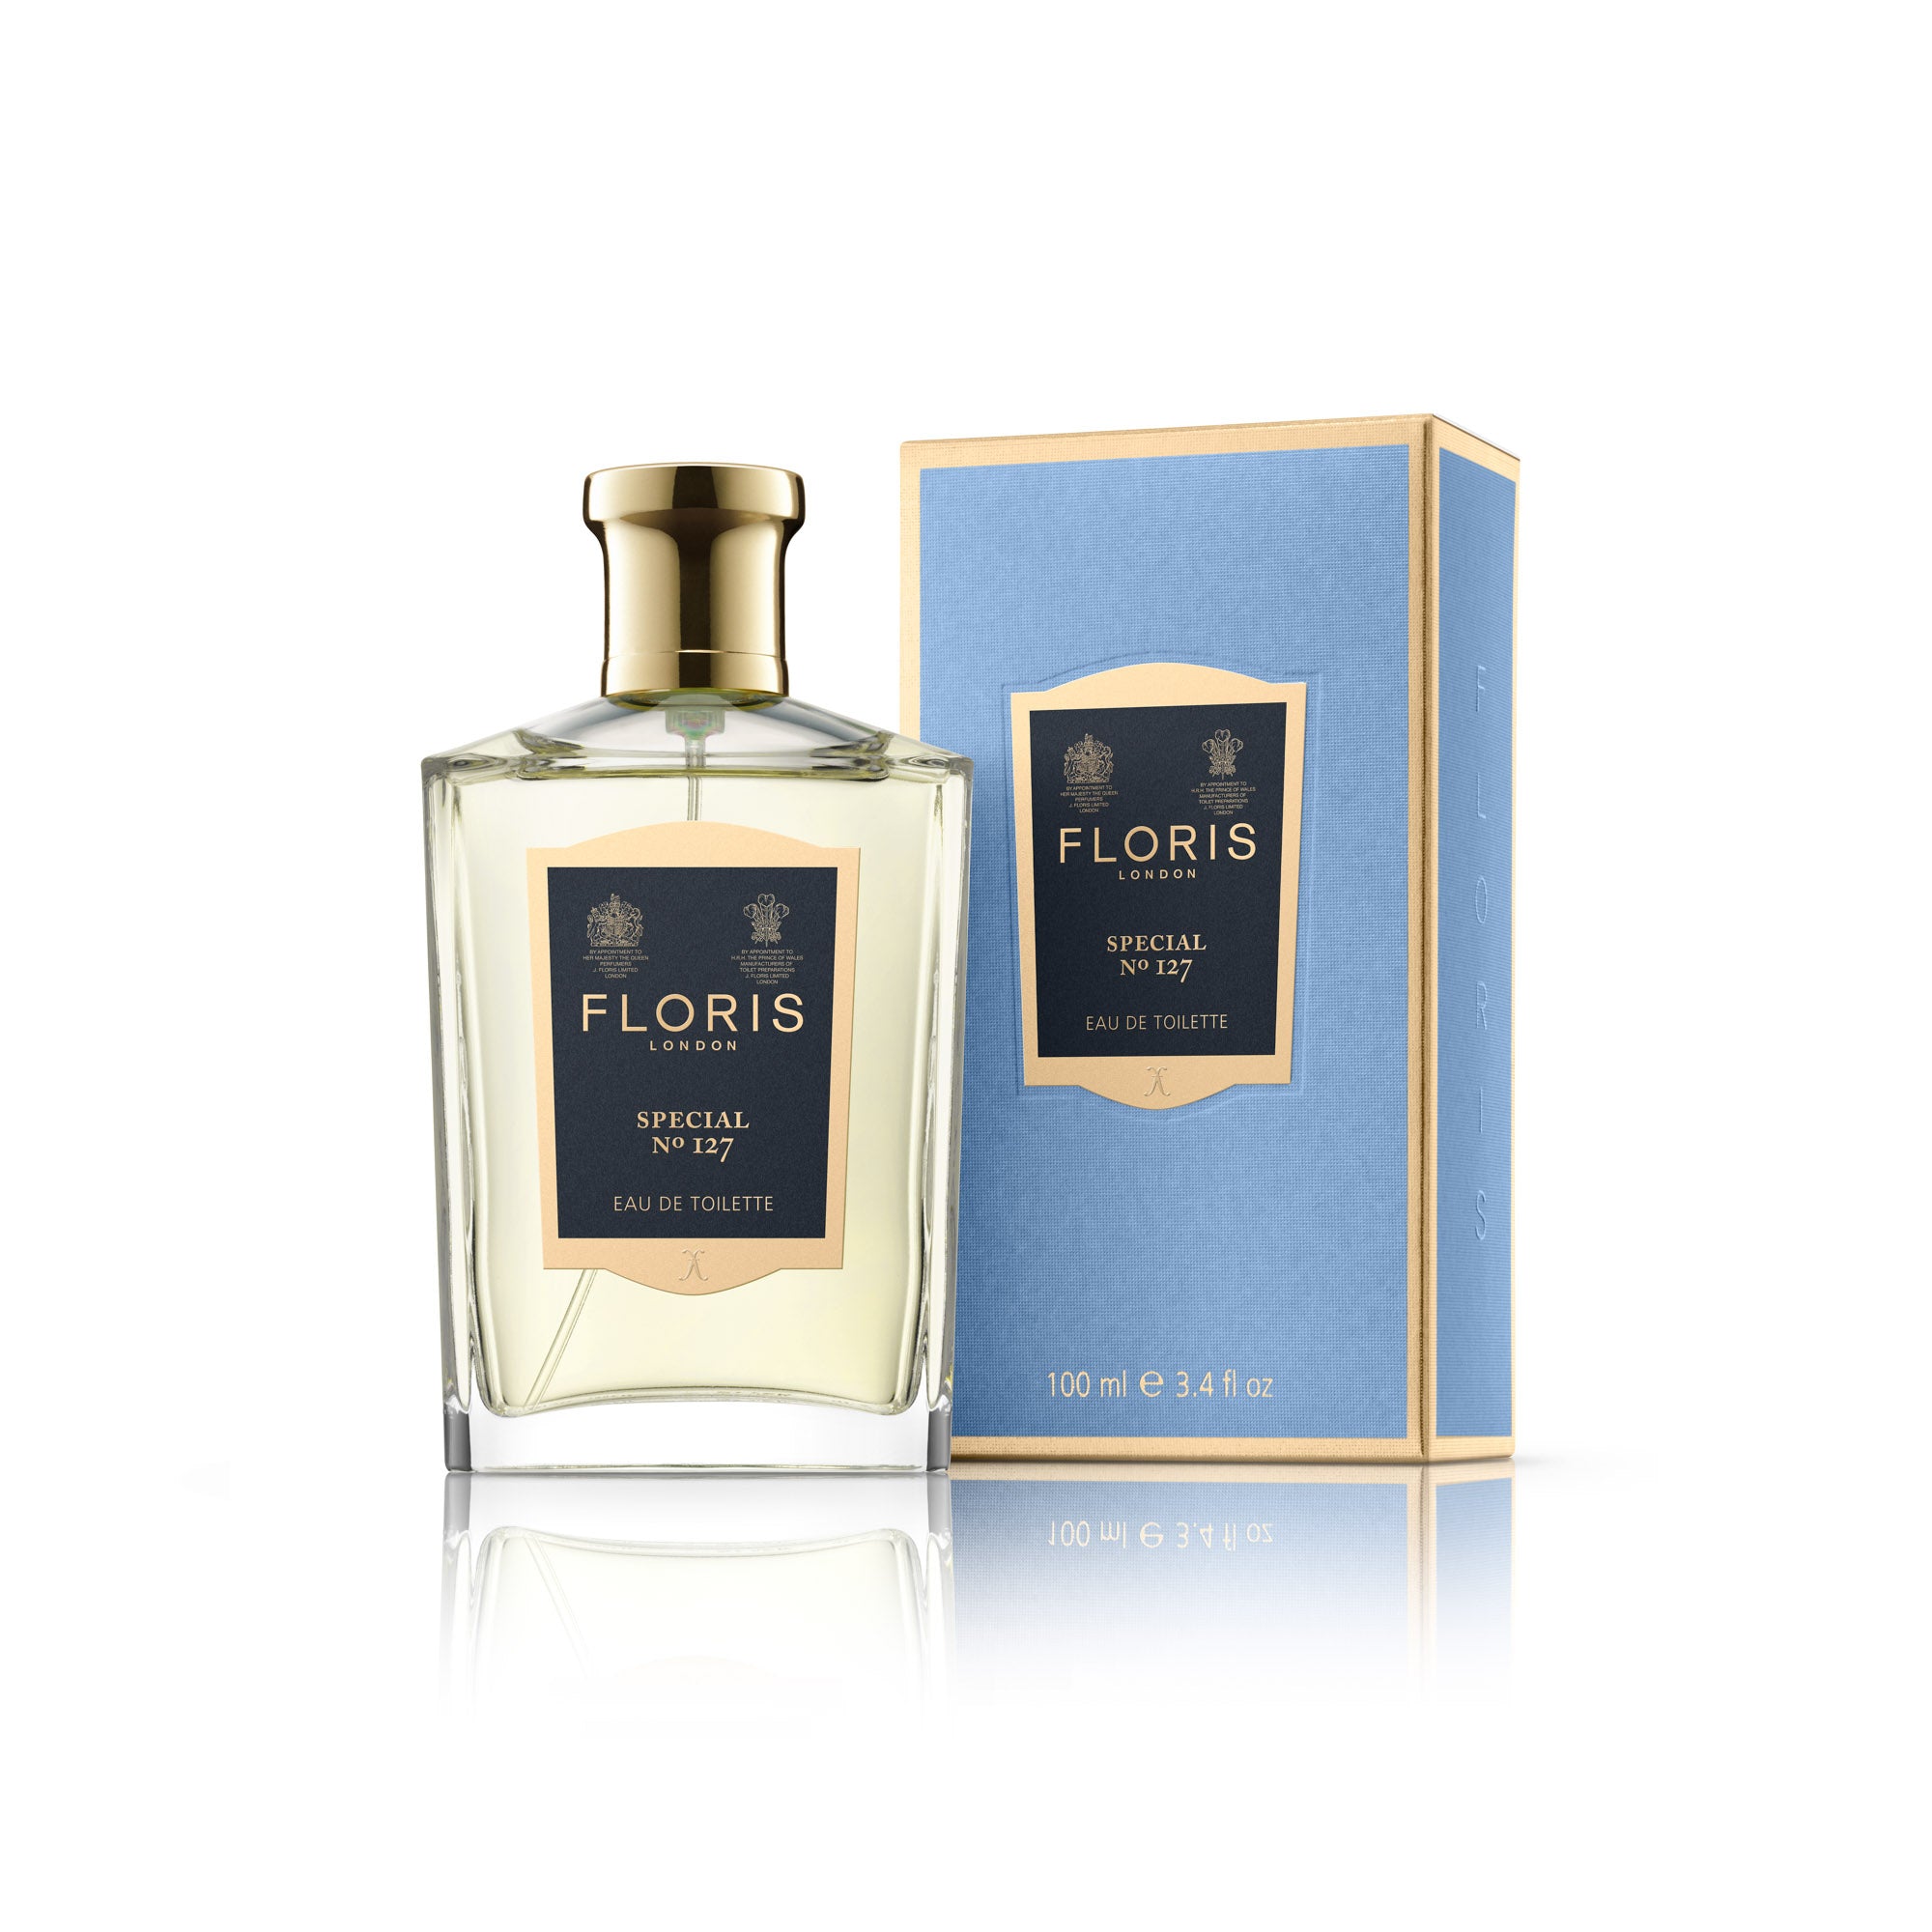 A bottle of FLORIS Special 127 100 ML citrus floral cologne on a white background.